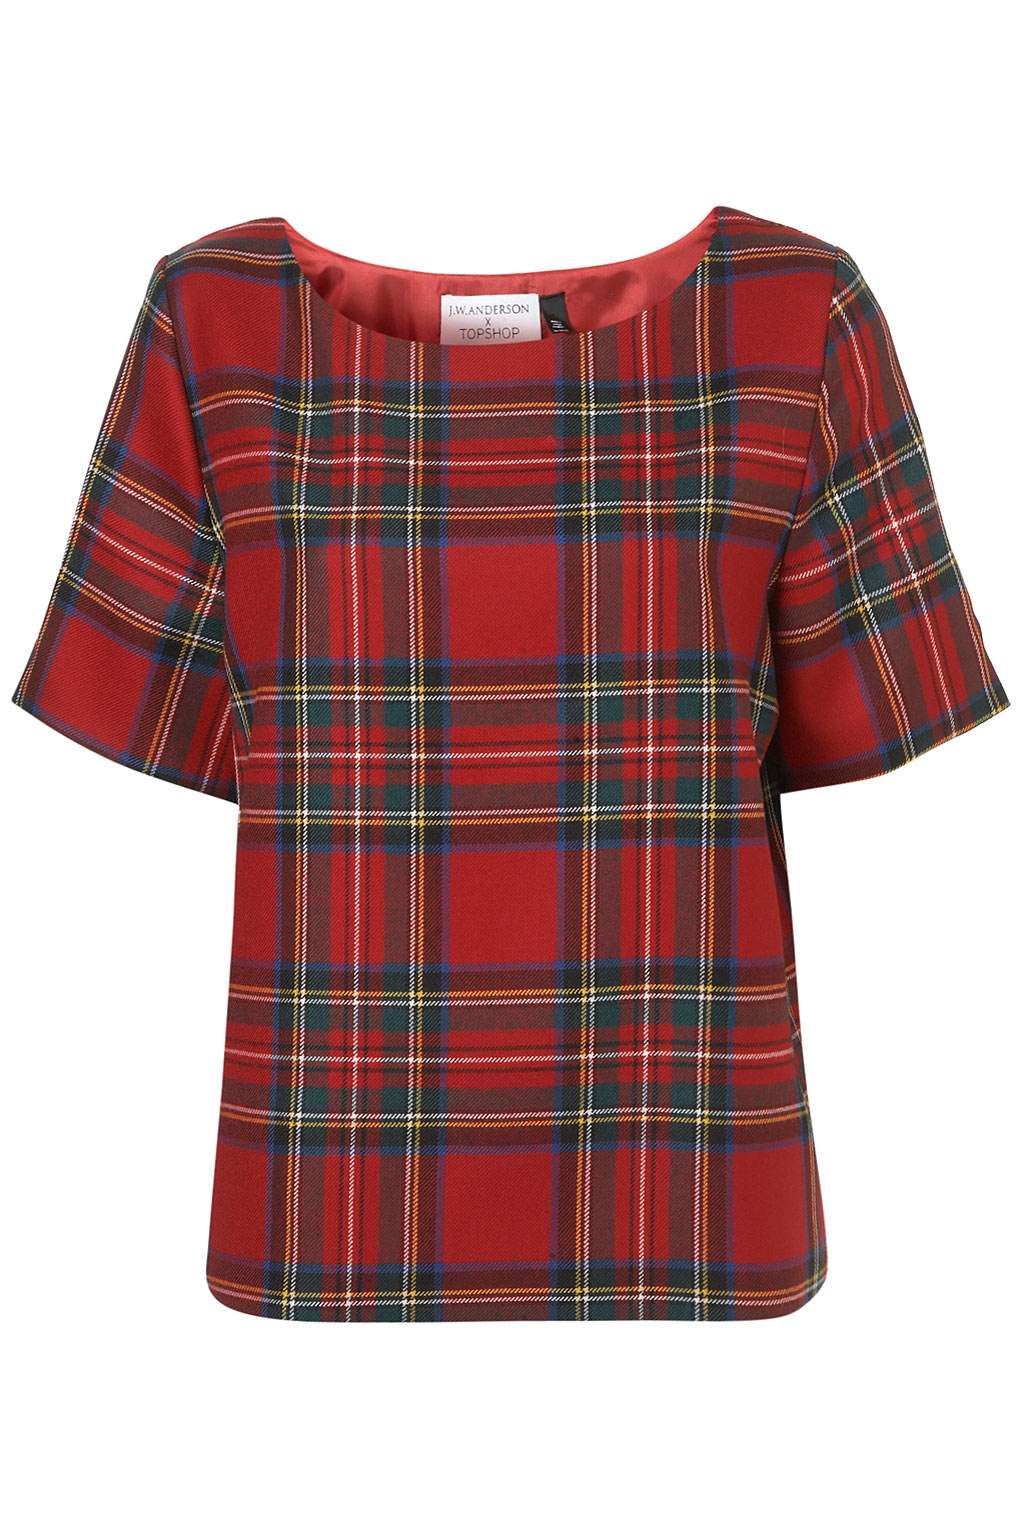 Lyst - Topshop Tartan Check Tee By Jw Anderson For Topshop in Red